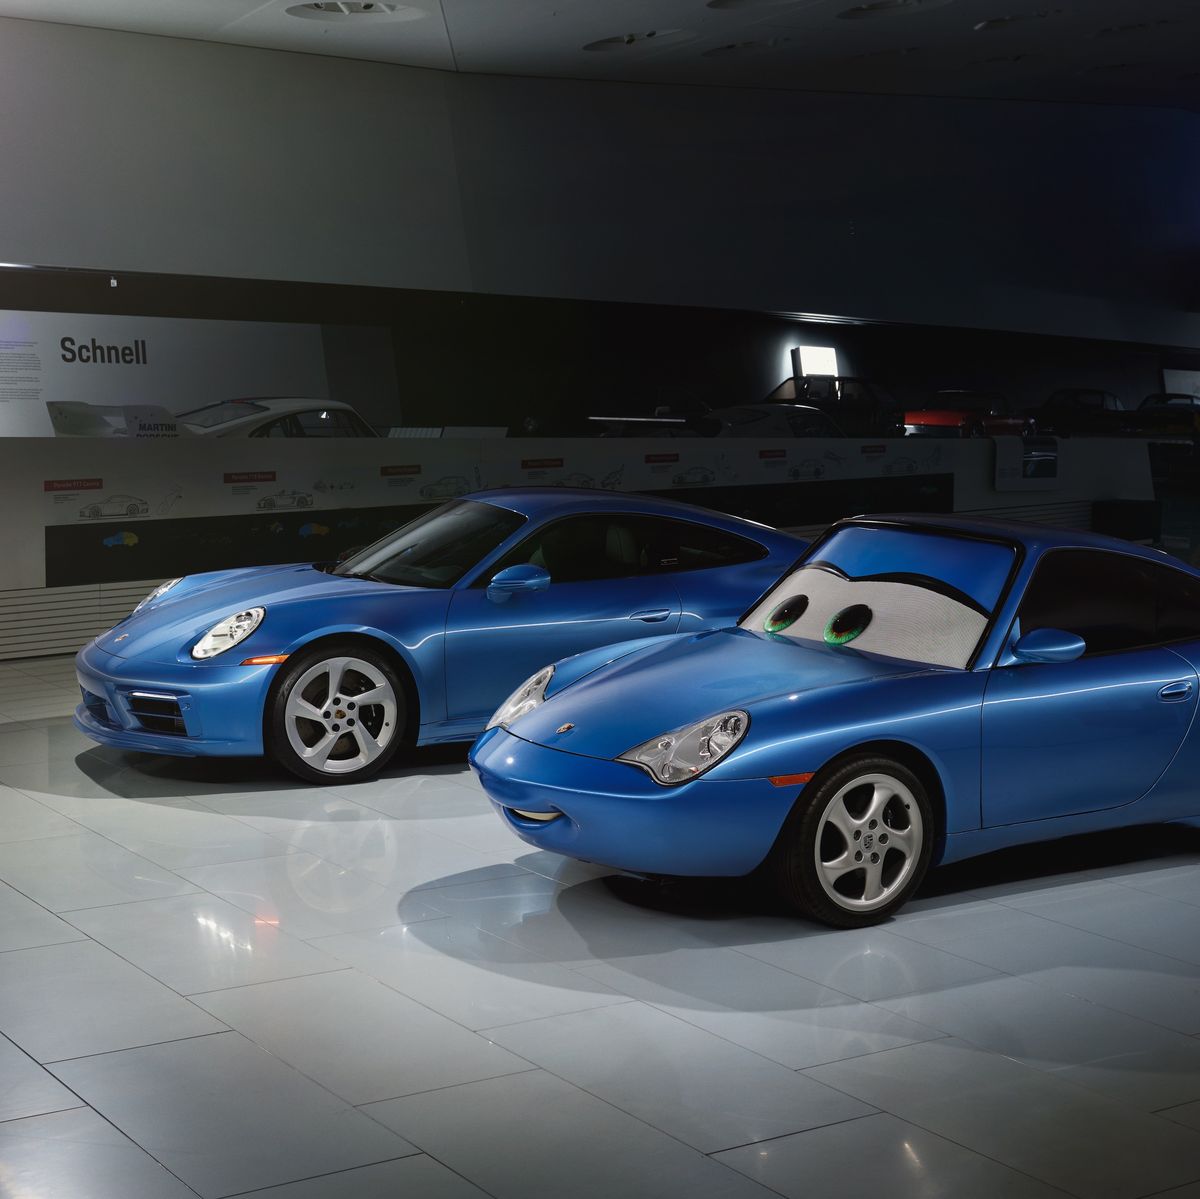 Porsche Built a Tribute to Sally Carrera. We Built the Real One